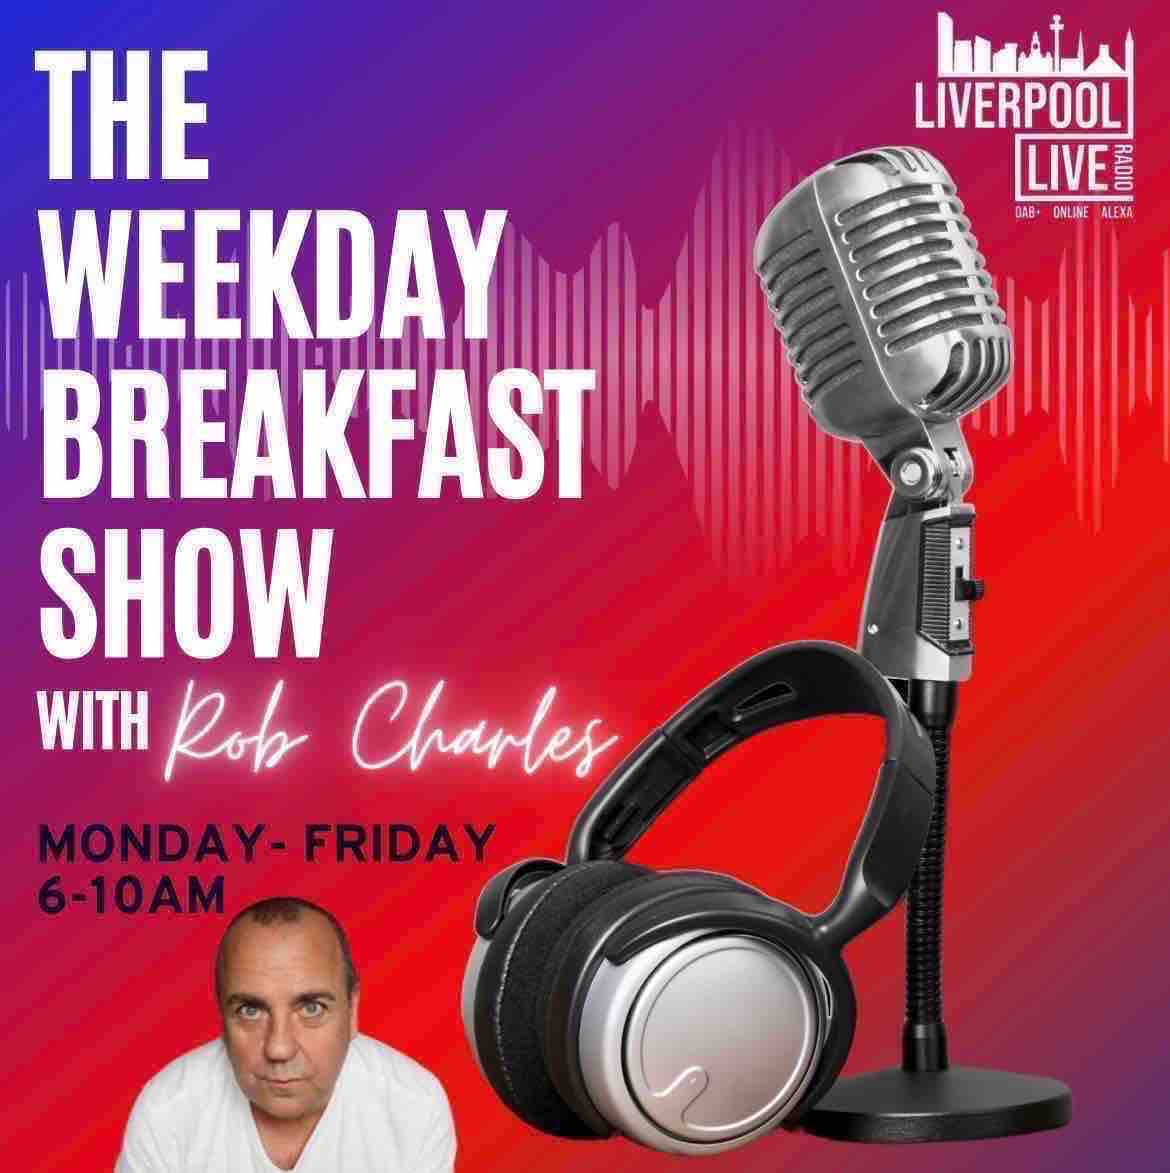 He’s back …….Rob Charles is here from 6am with your week day breakfast show !!